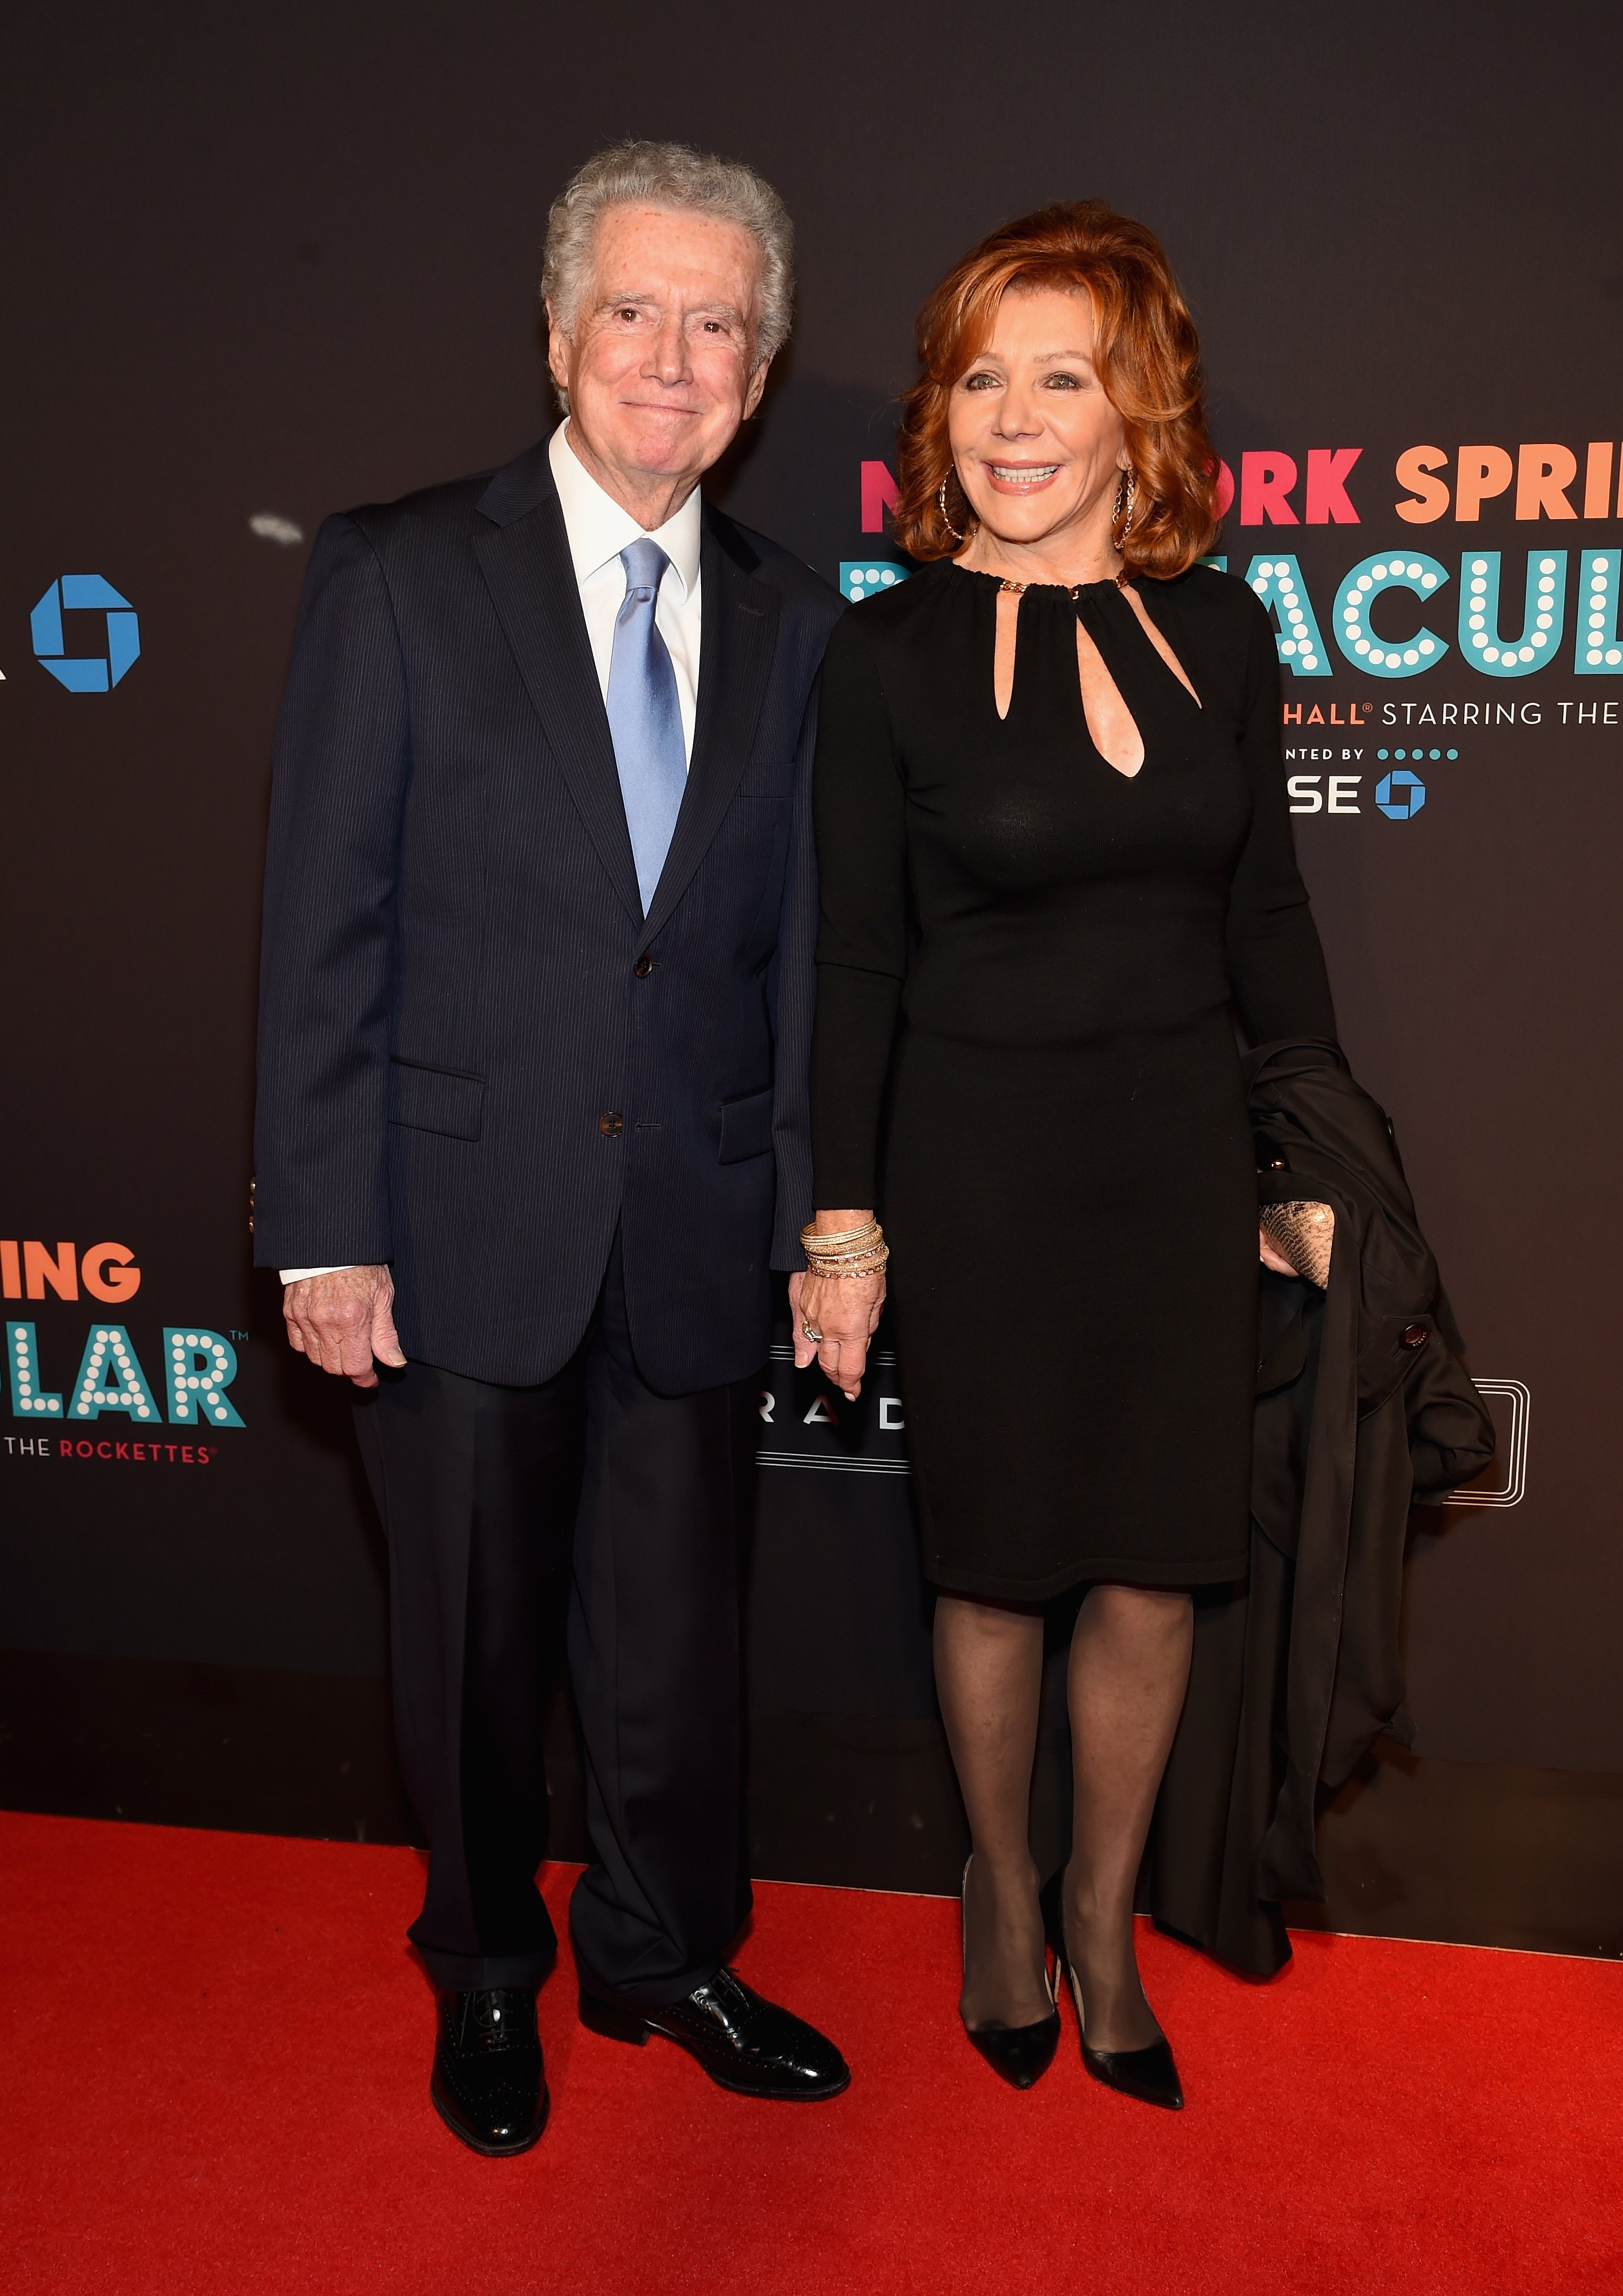 Regis Philbin and Joy Philbin attend the 2015 New York Spring Spectacular on March 26, 2015, in New York City. | Source: Getty Images.